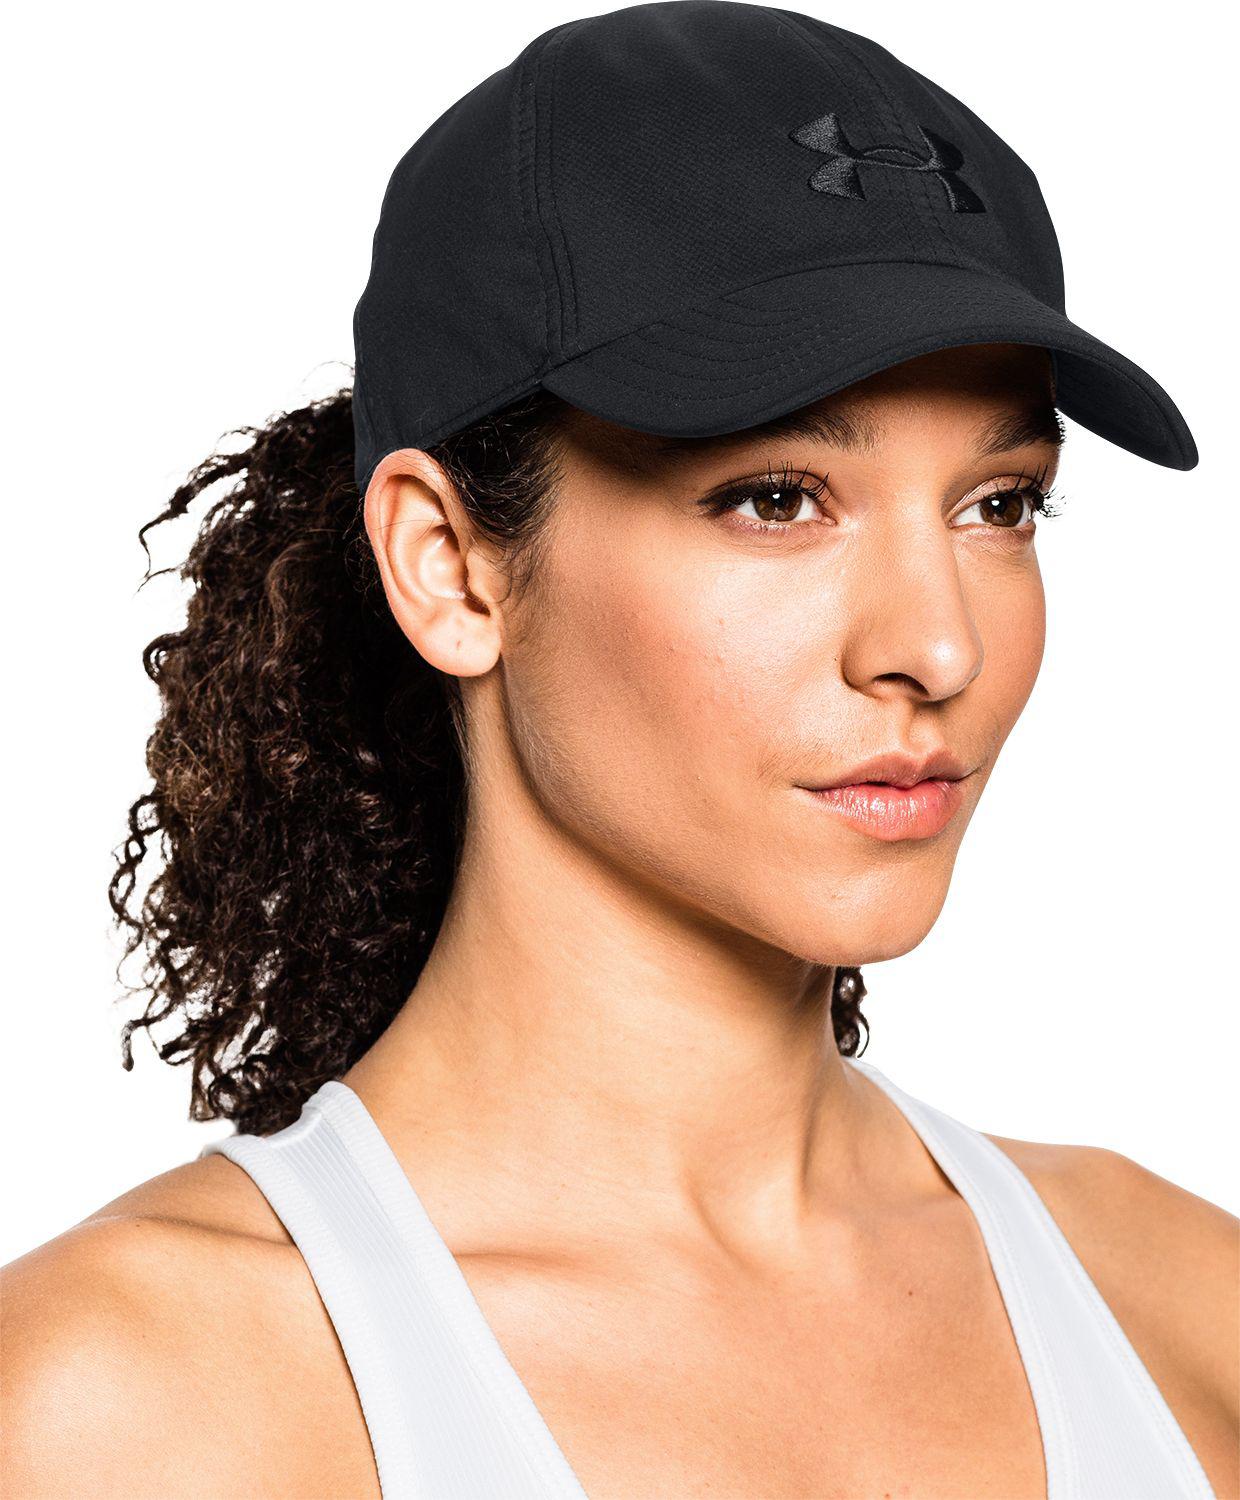 Under Armour Women's Microthread Renegade Adjustable Hat Cap NWT NEW 2019 